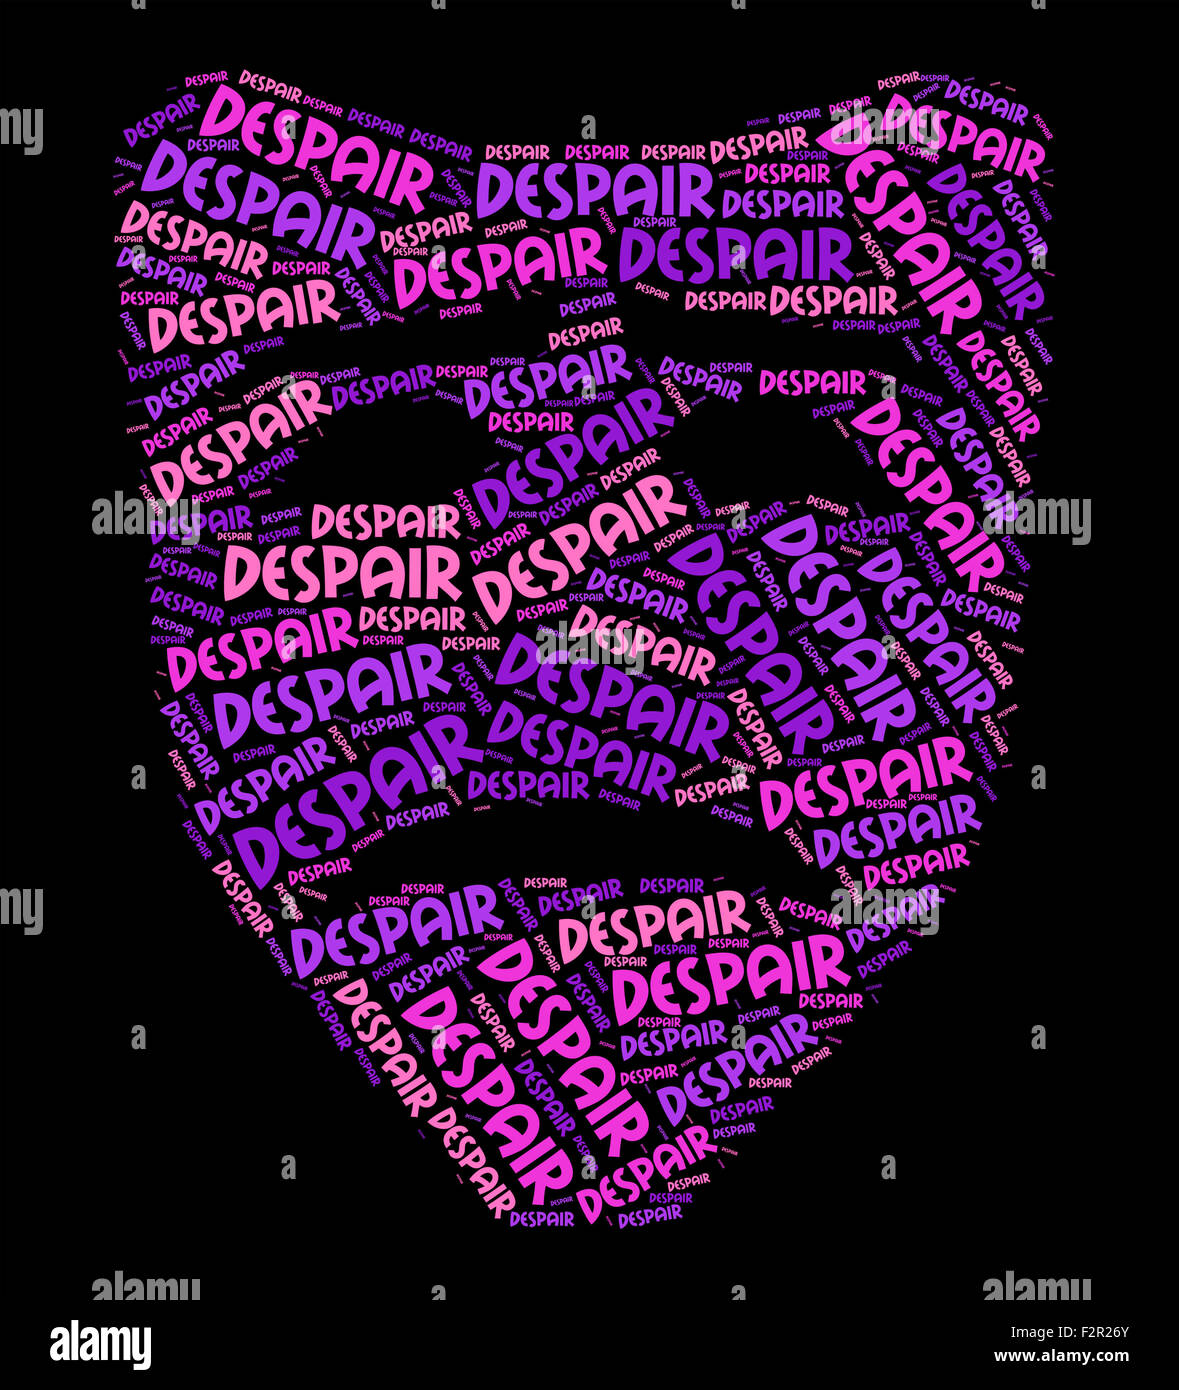 Despair Word Meaning Defeatism Misery And Wordclouds Stock Photo